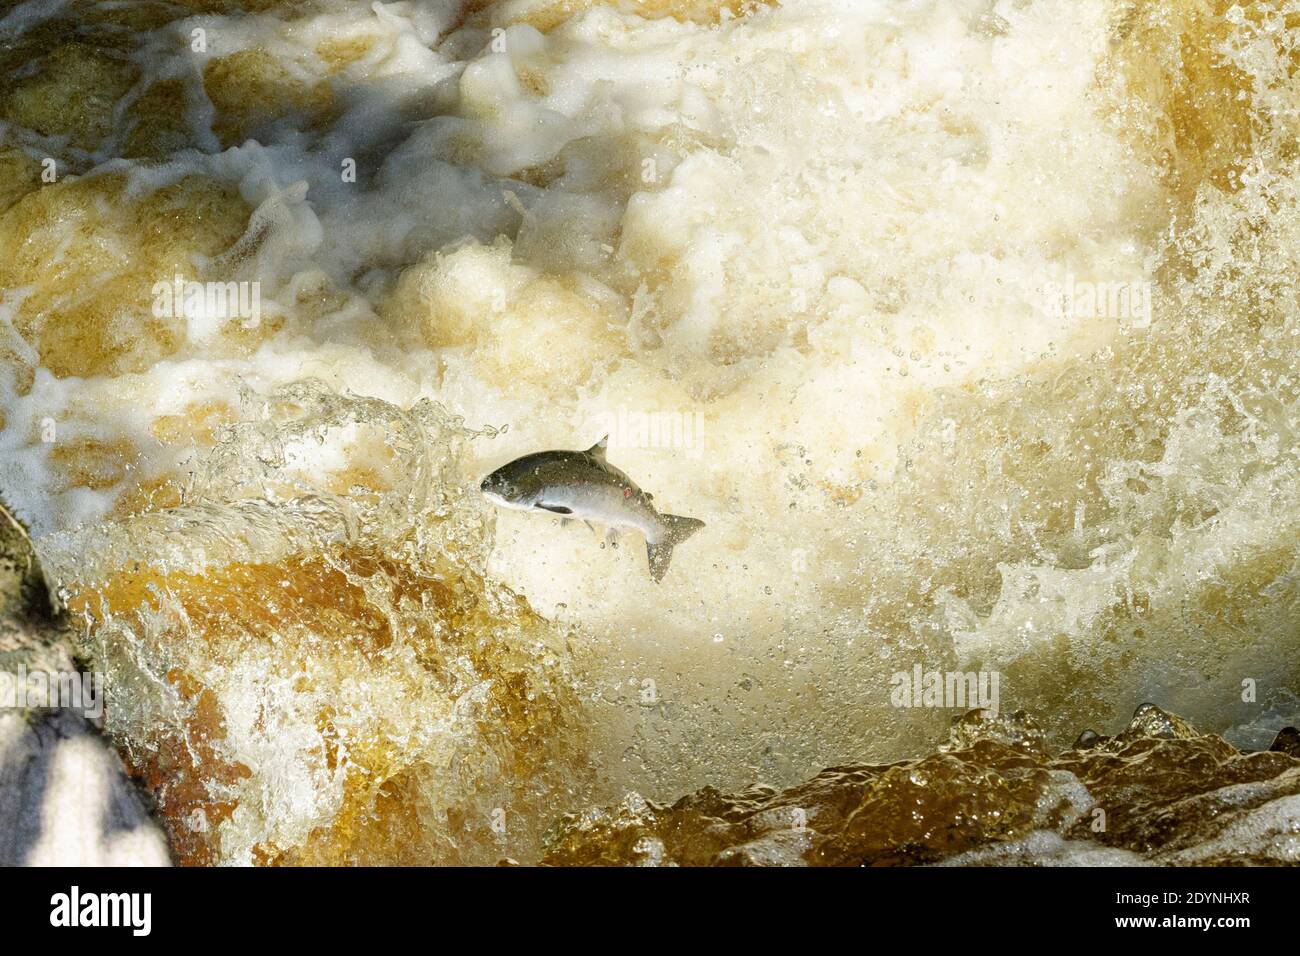 Atlantic salmon (Salmo salar) leaping a waterfall to get to spawning grounds upstream. River Endrick, Trossachs National Park, Scotland Stock Photo